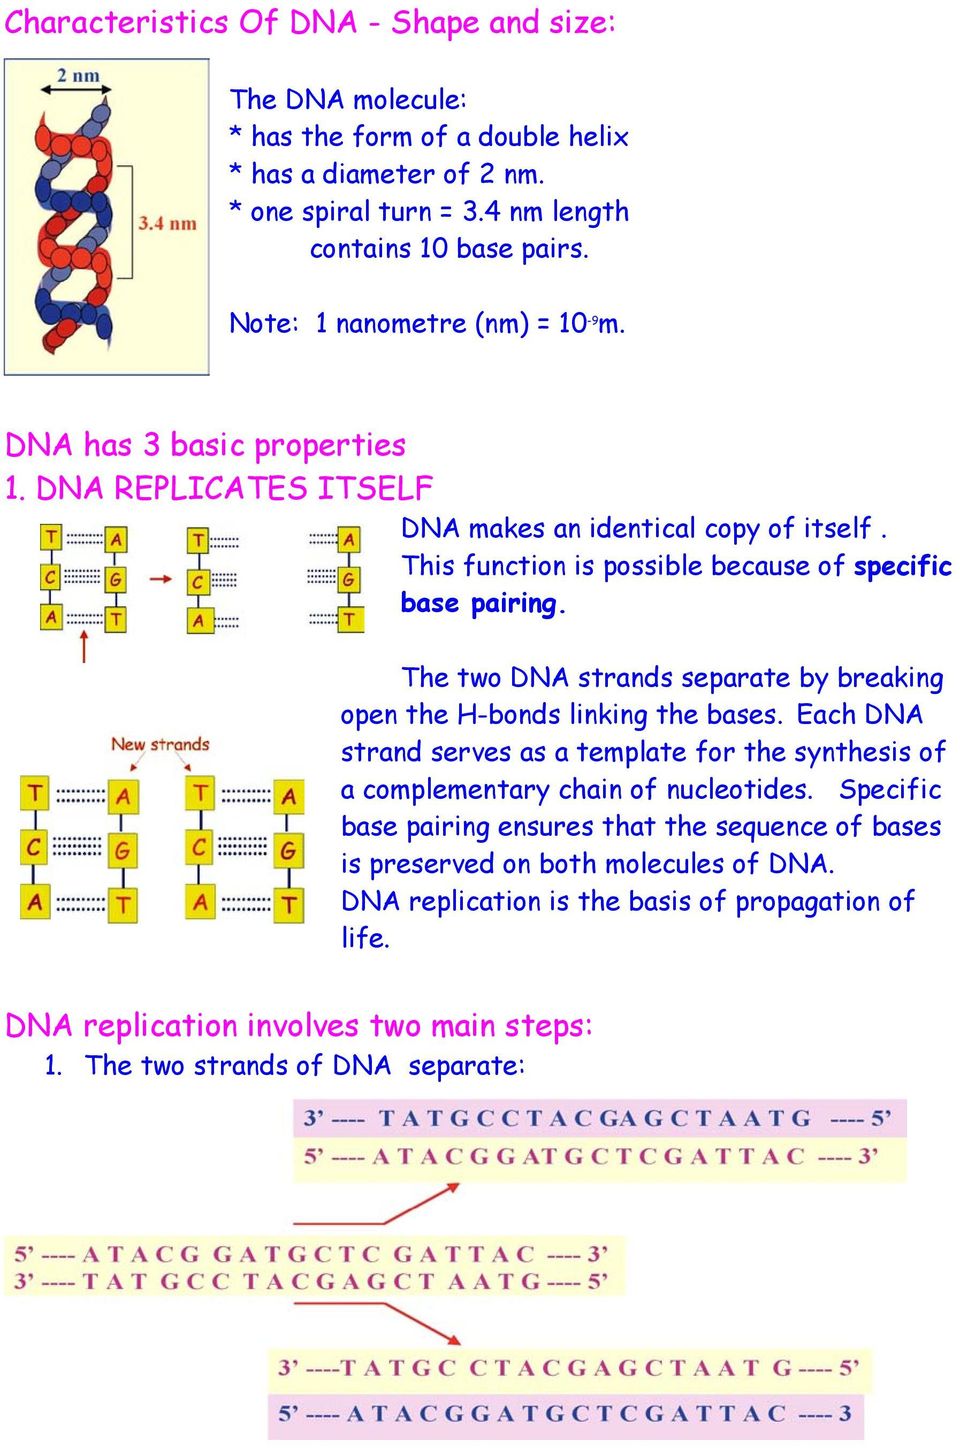 The two DNA strands separate by breaking open the H-bonds linking the bases. Each DNA strand serves as a template for the synthesis of a complementary chain of nucleotides.